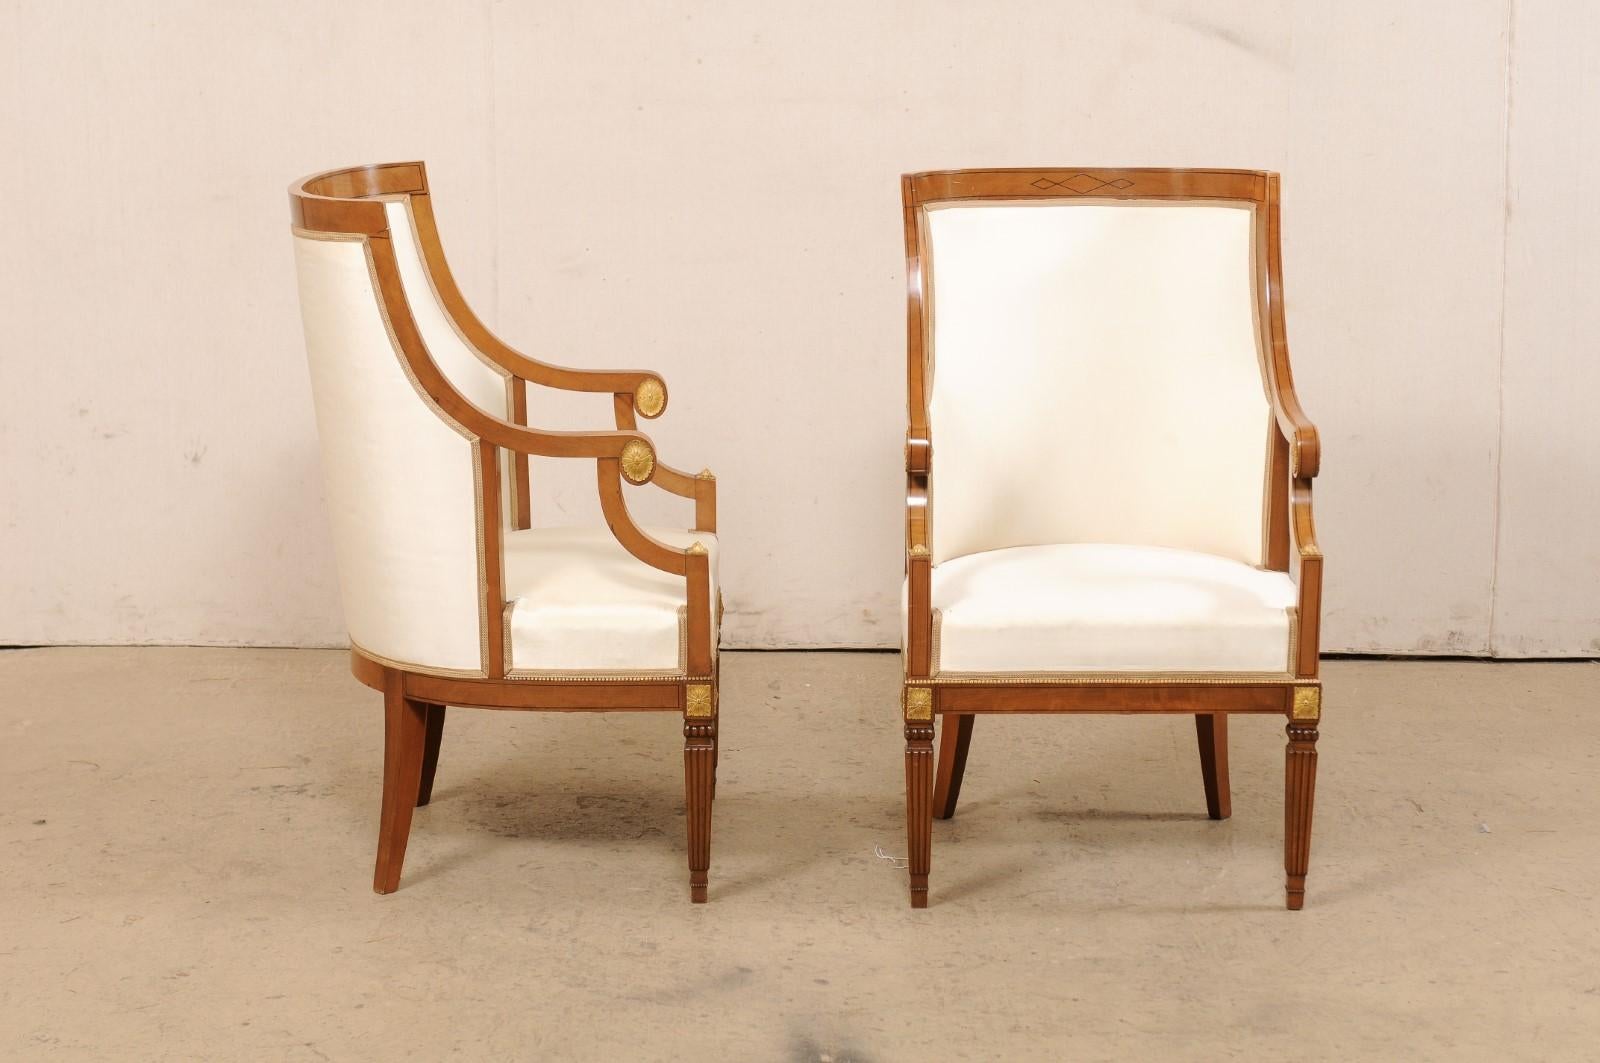 Italian Pair of Barrel-Back Carved-Wood & Upholstered Armchairs Mid-20th Century For Sale 1